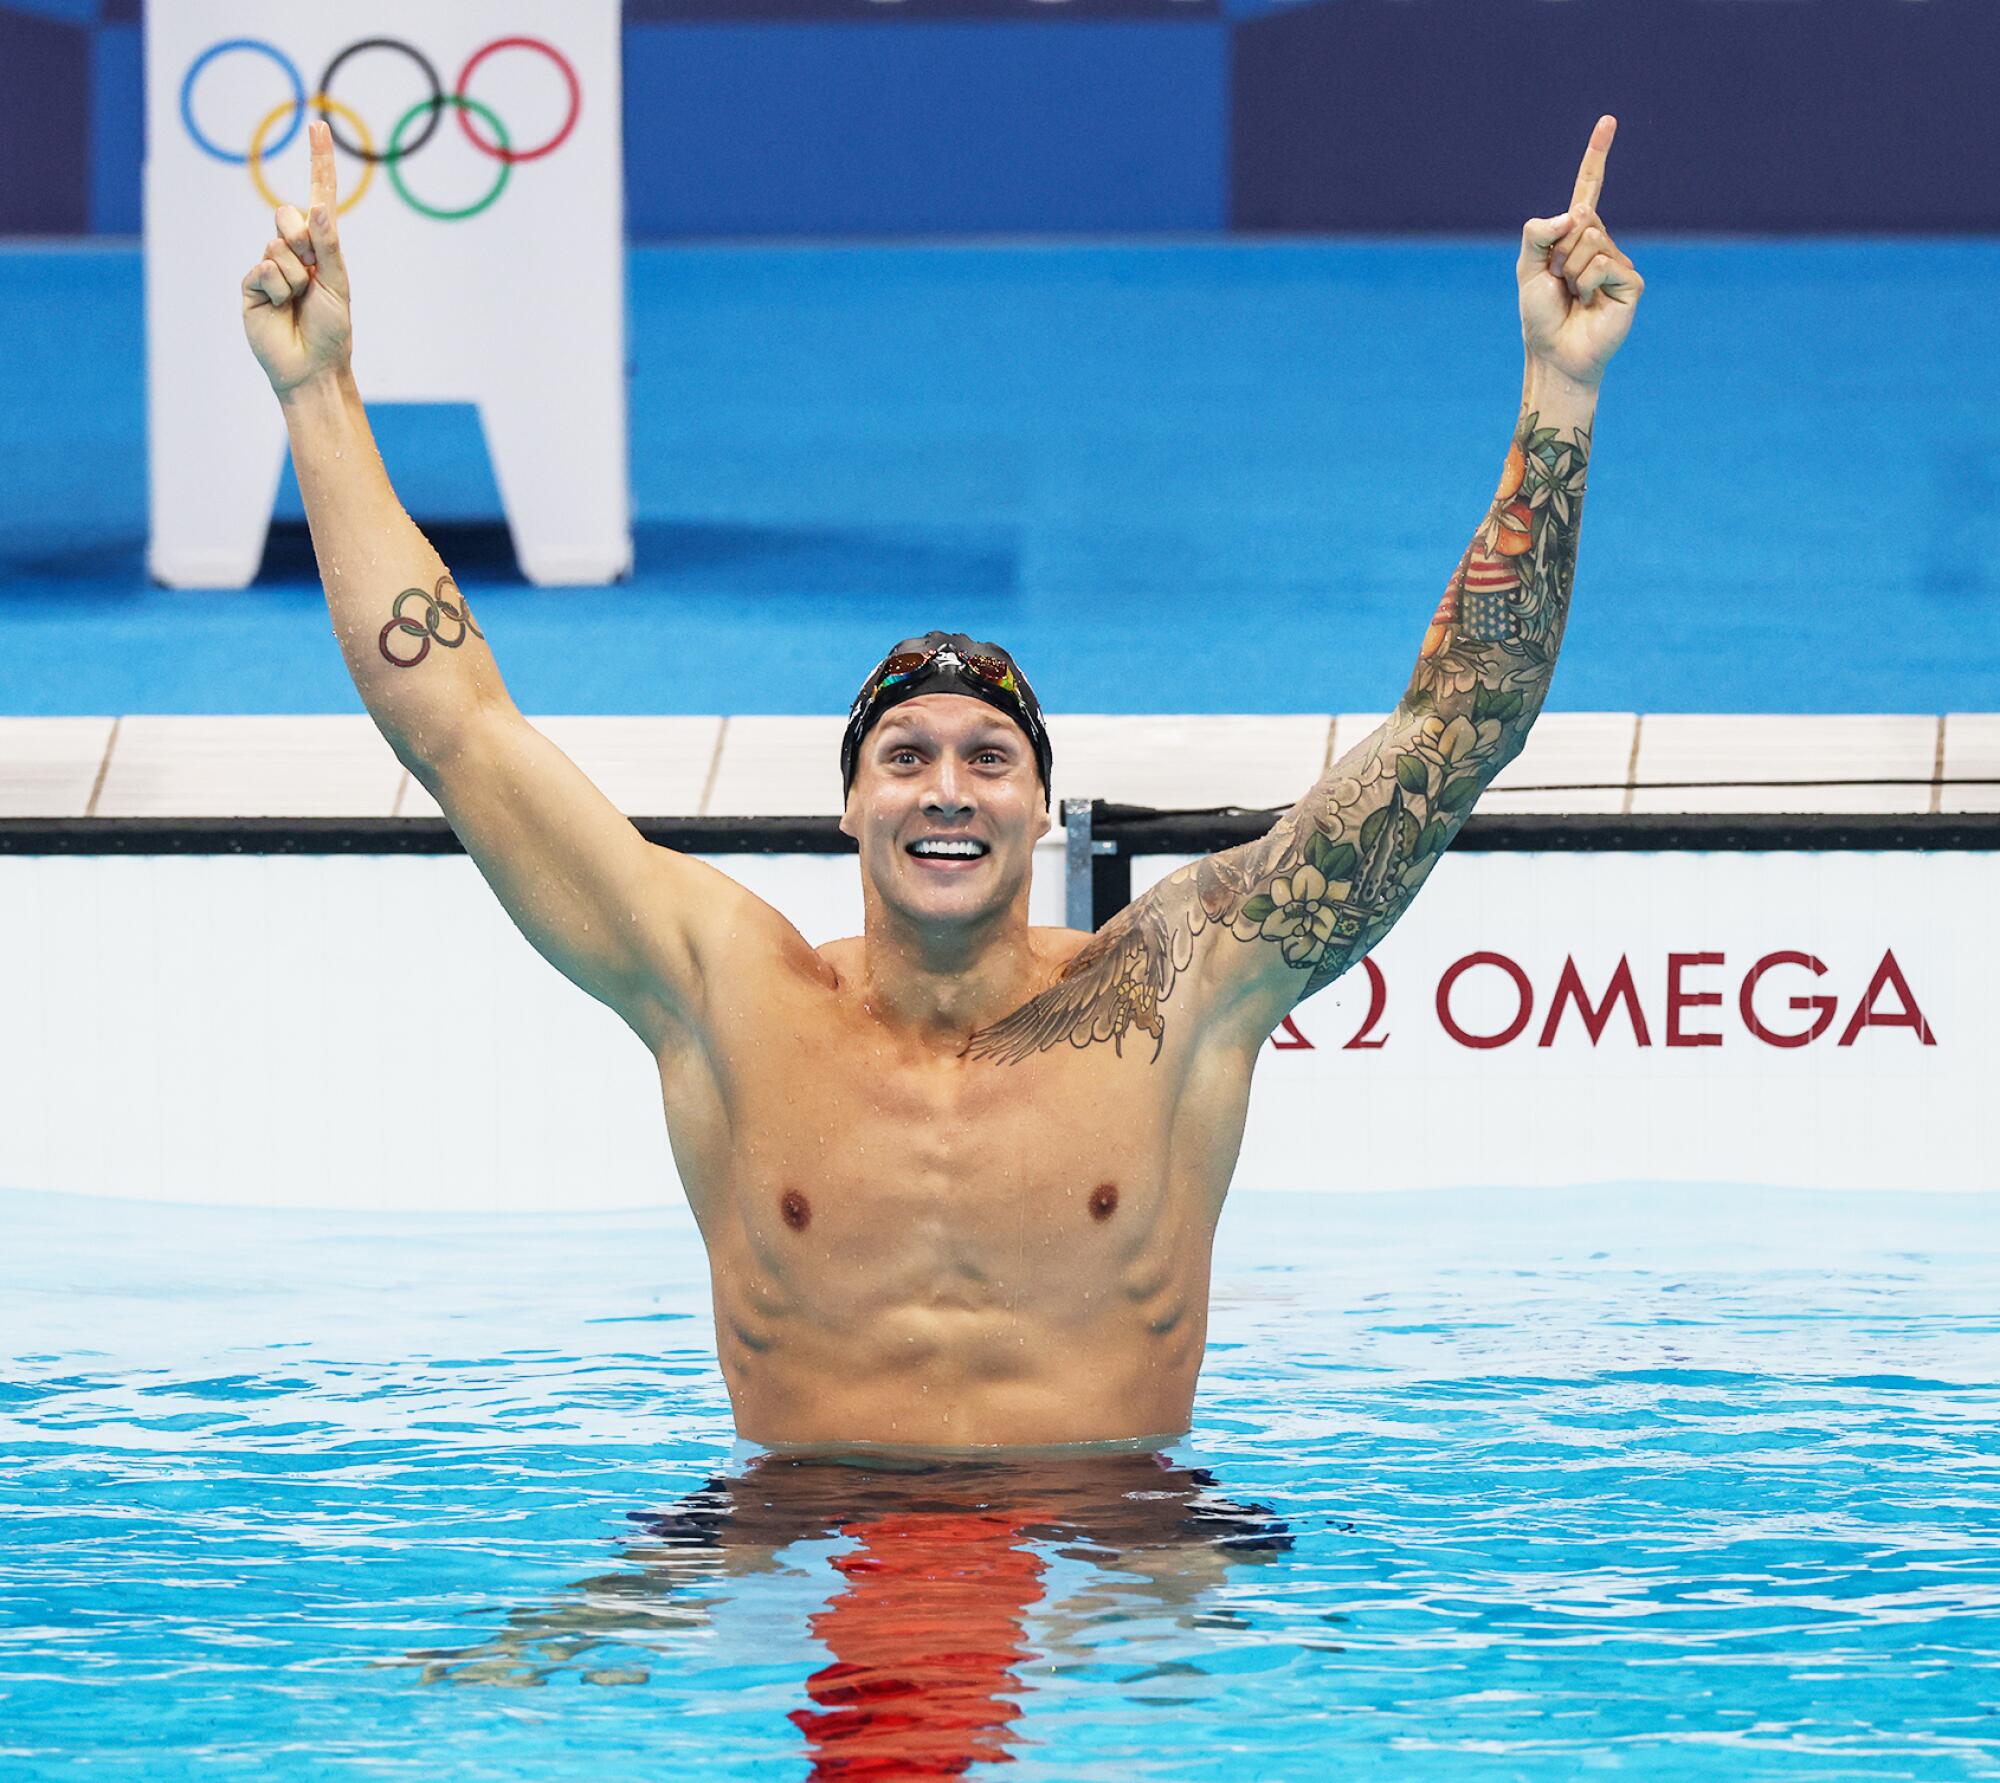 United States' Caeleb Dressel celebrates after winning the gold medal in the 100-meter freestyle